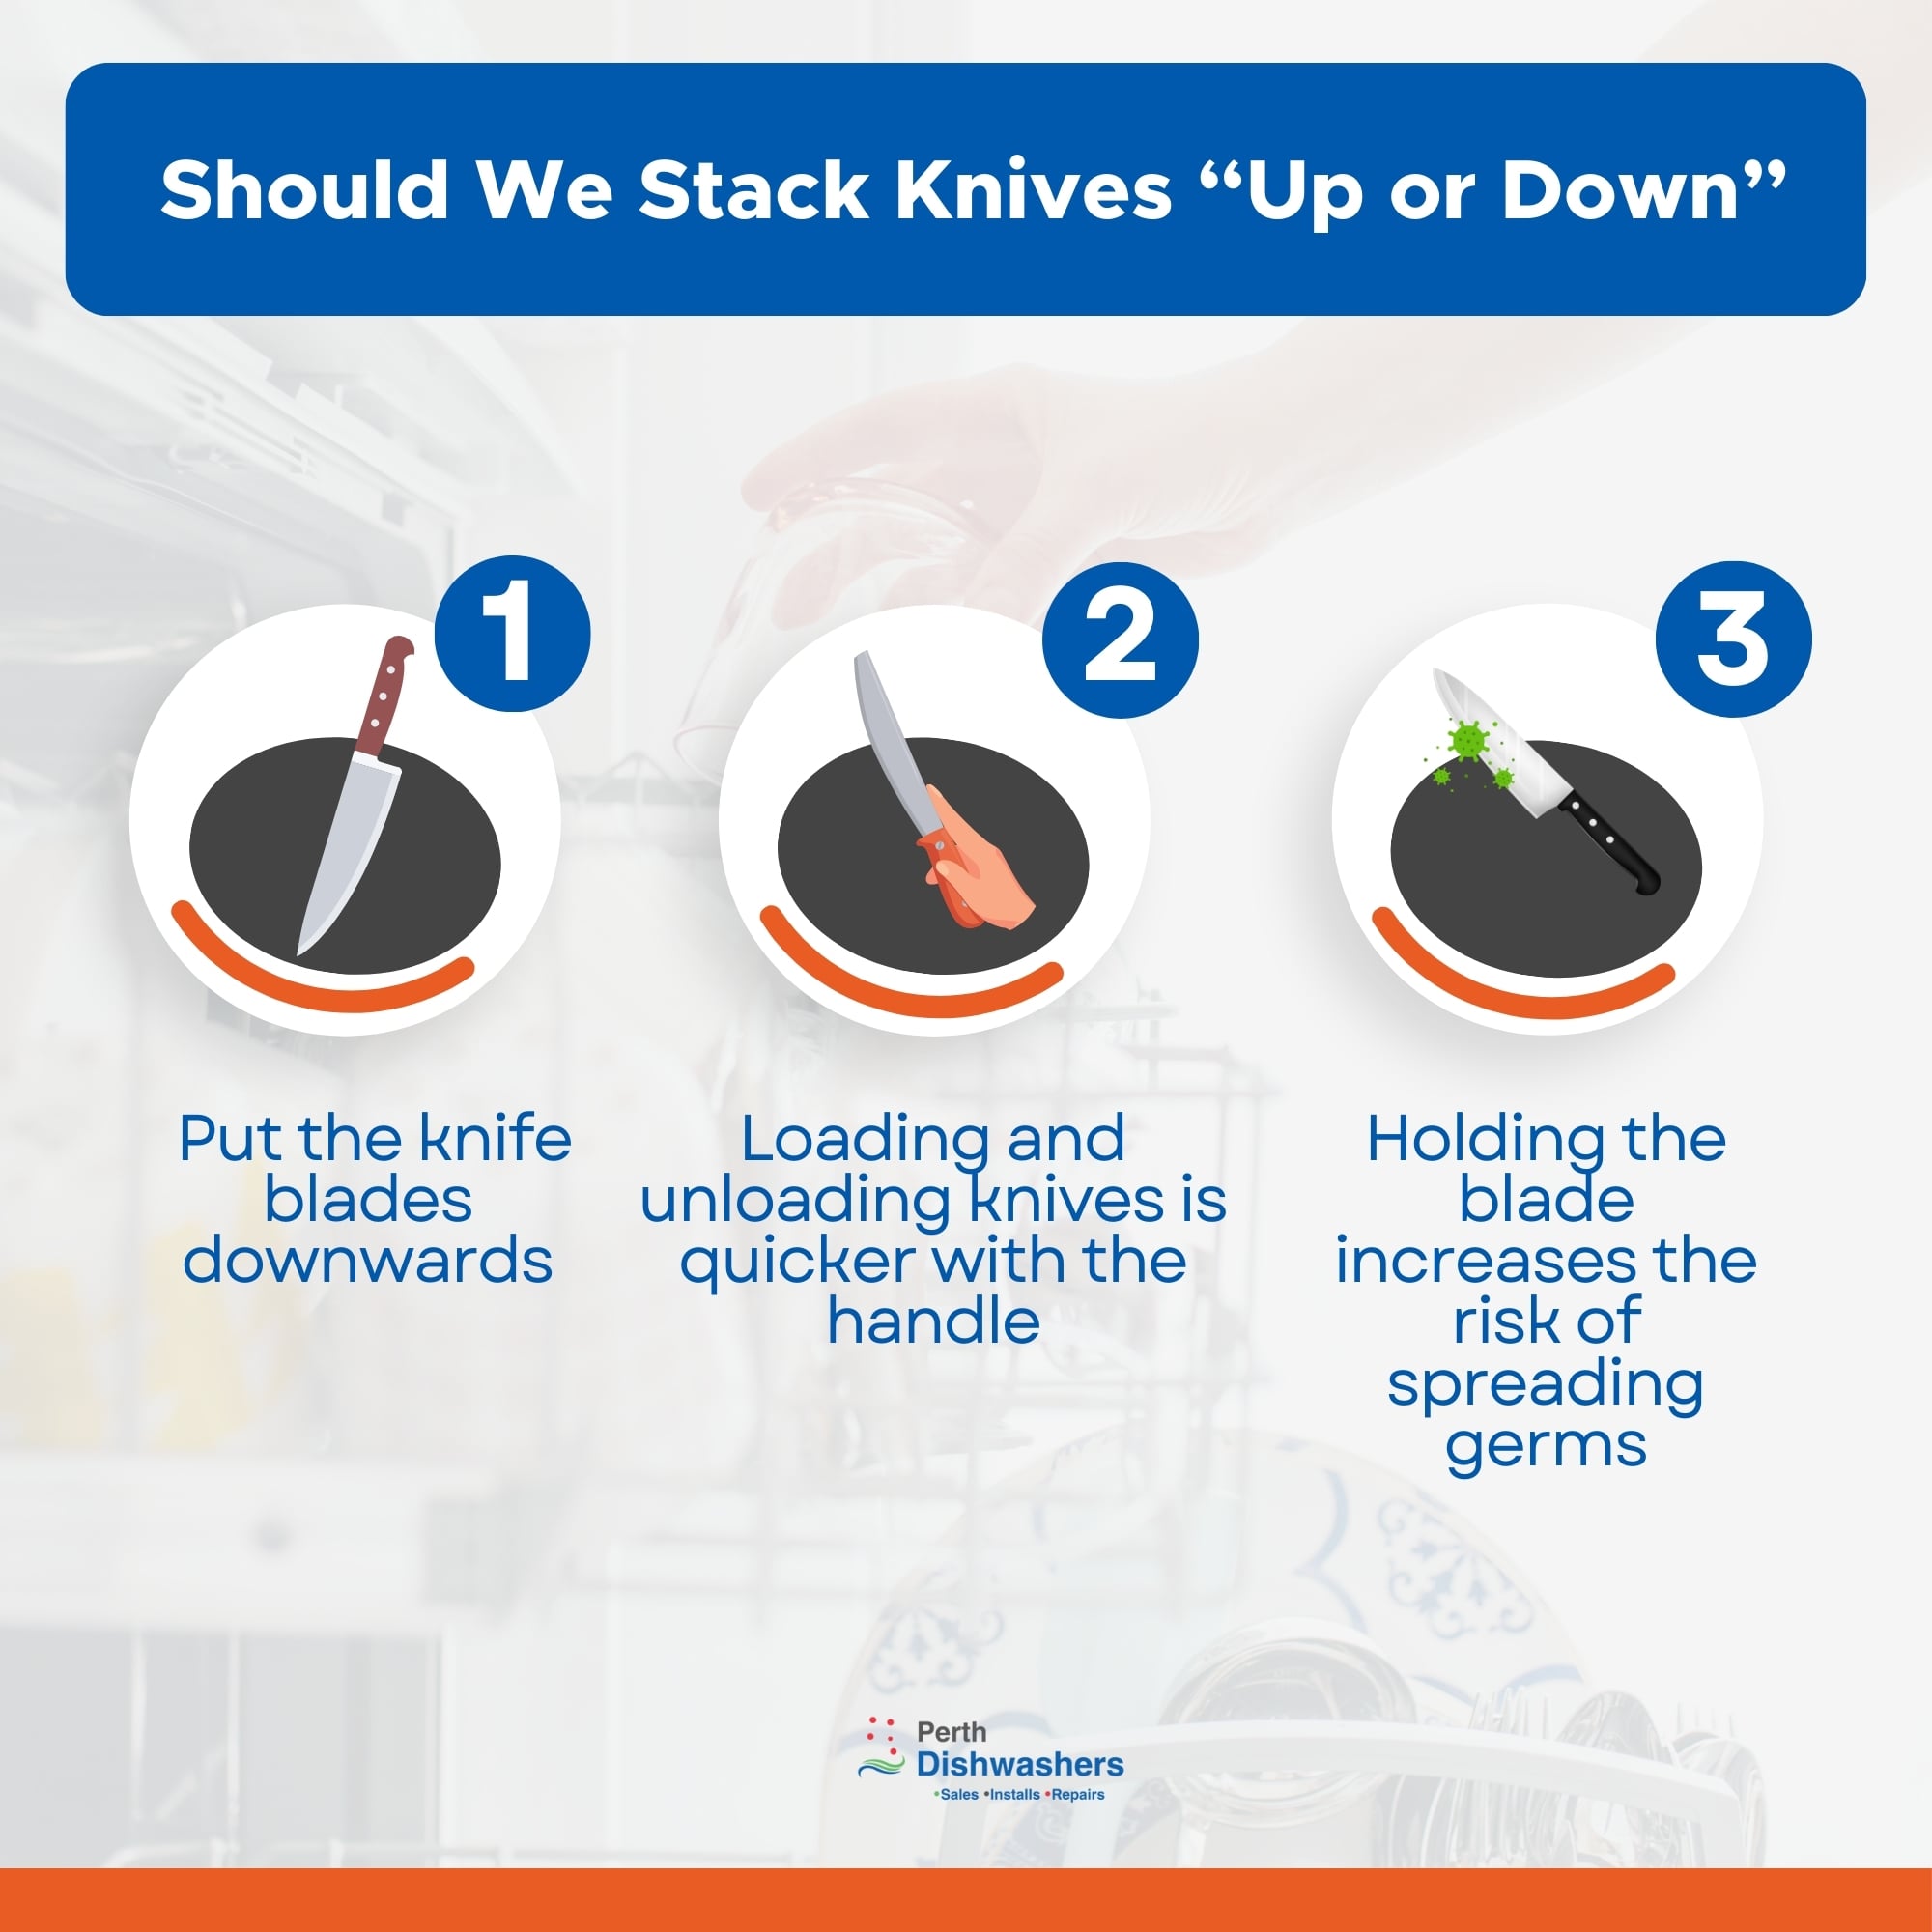 should we stack knives “up or down” m2